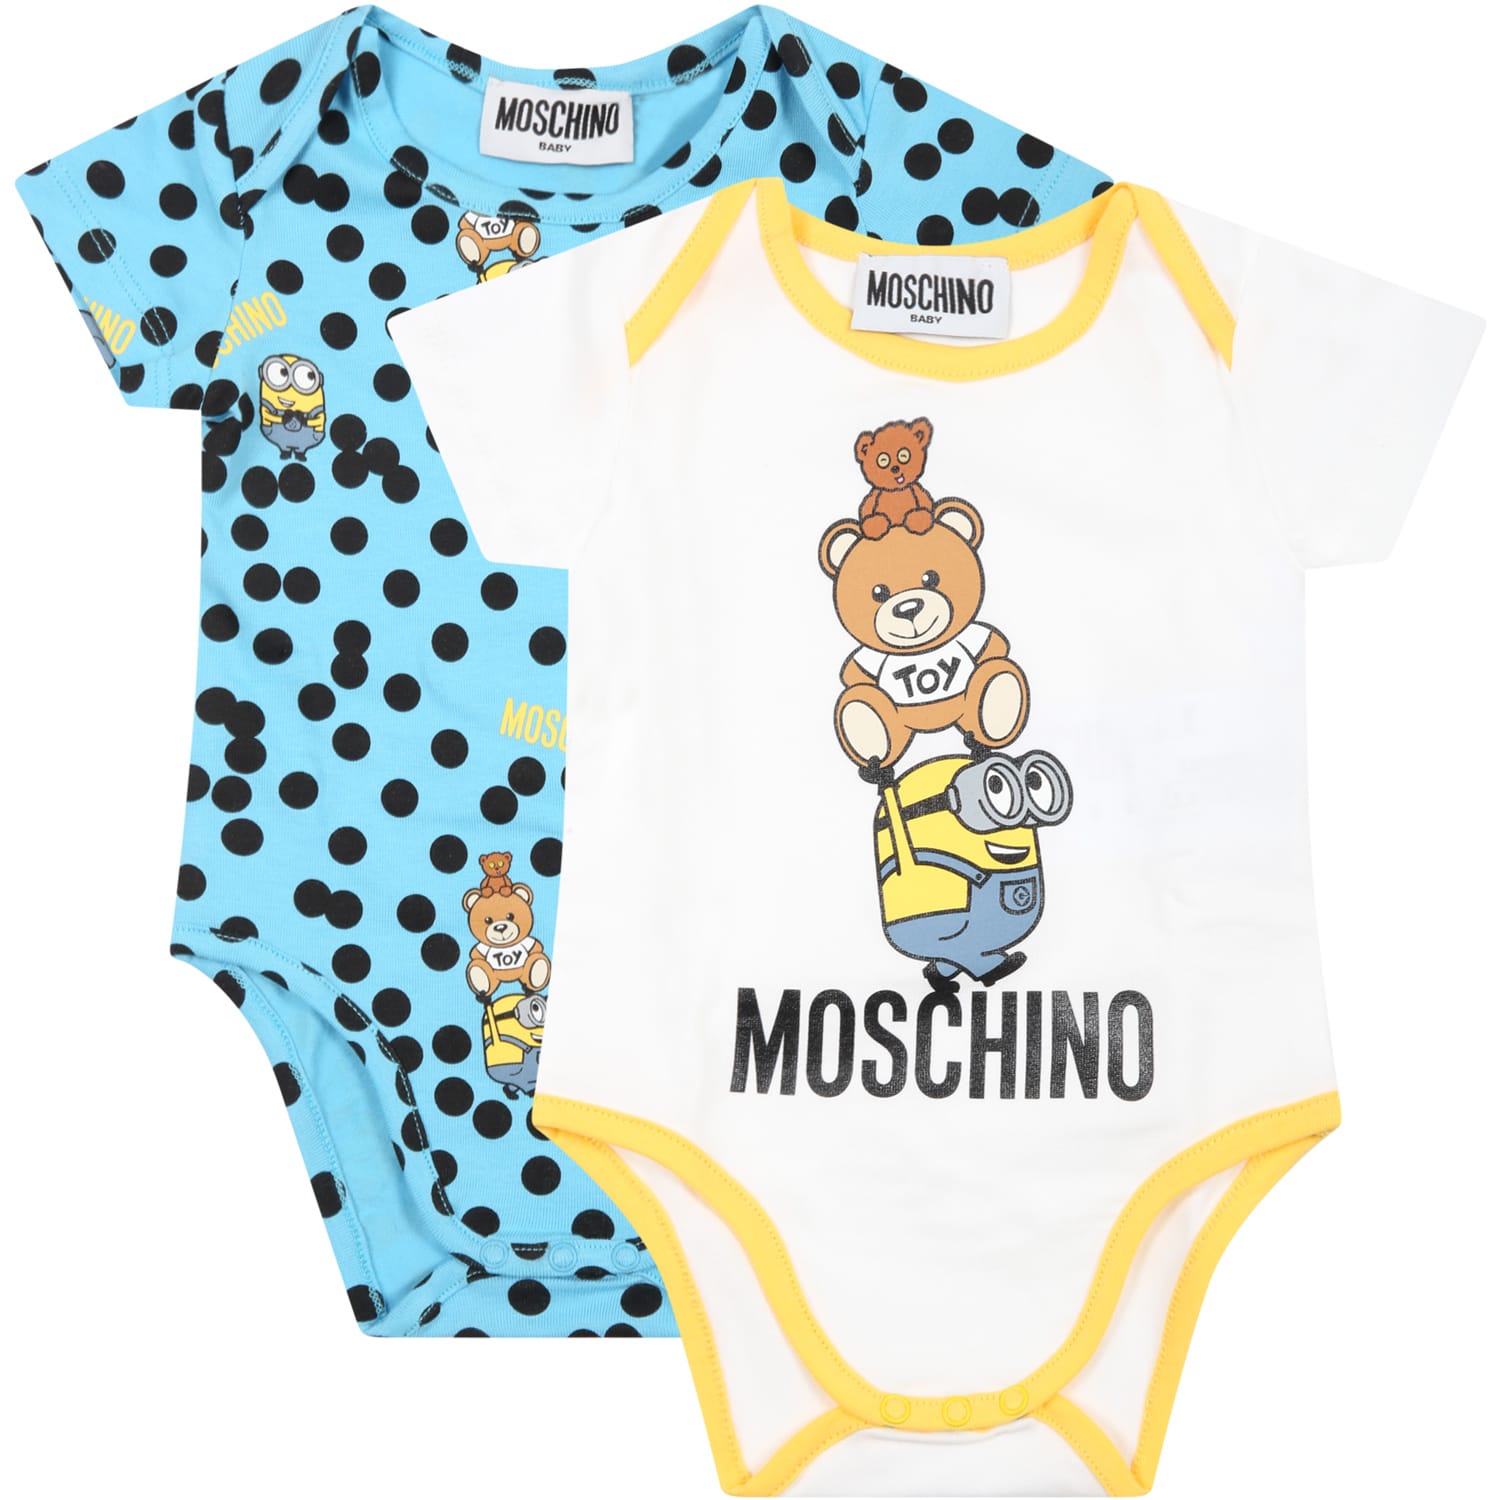 Moschino Multicolor Set For Baby Boy With Minions And Teddy Bear